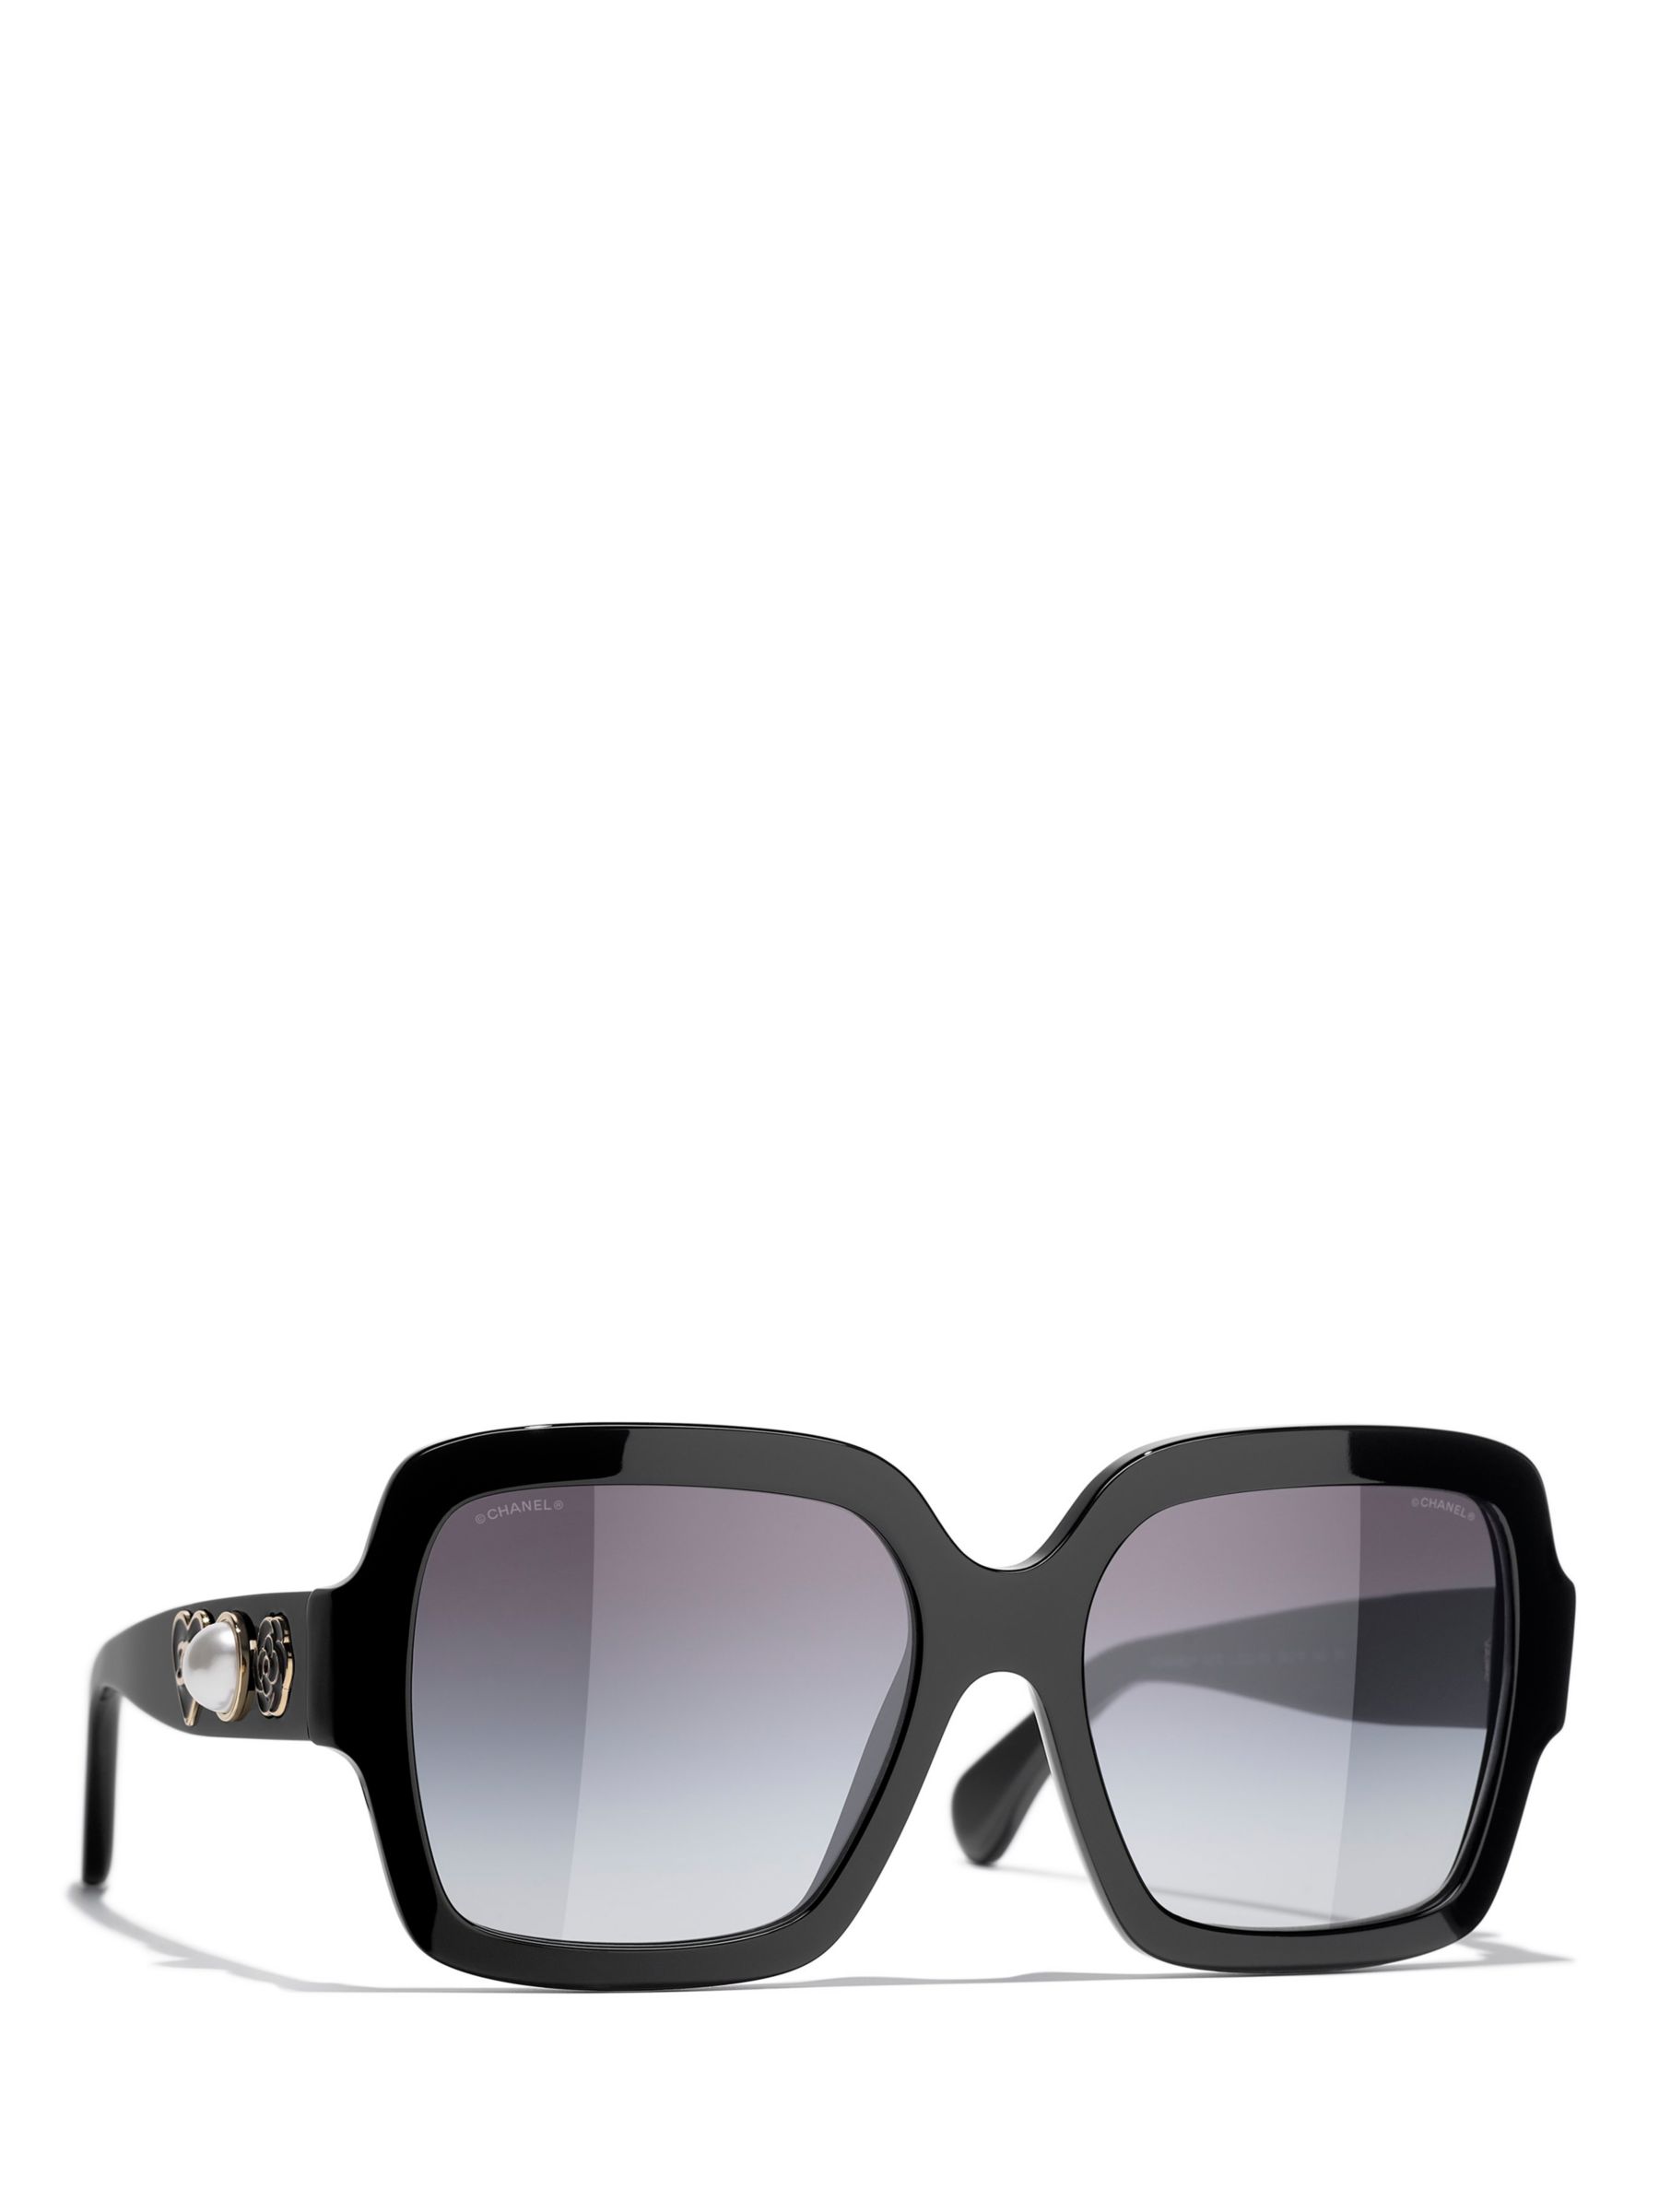 Buy CHANEL CH5479 Women's Square Sunglasses, Black/Grey Online at johnlewis.com